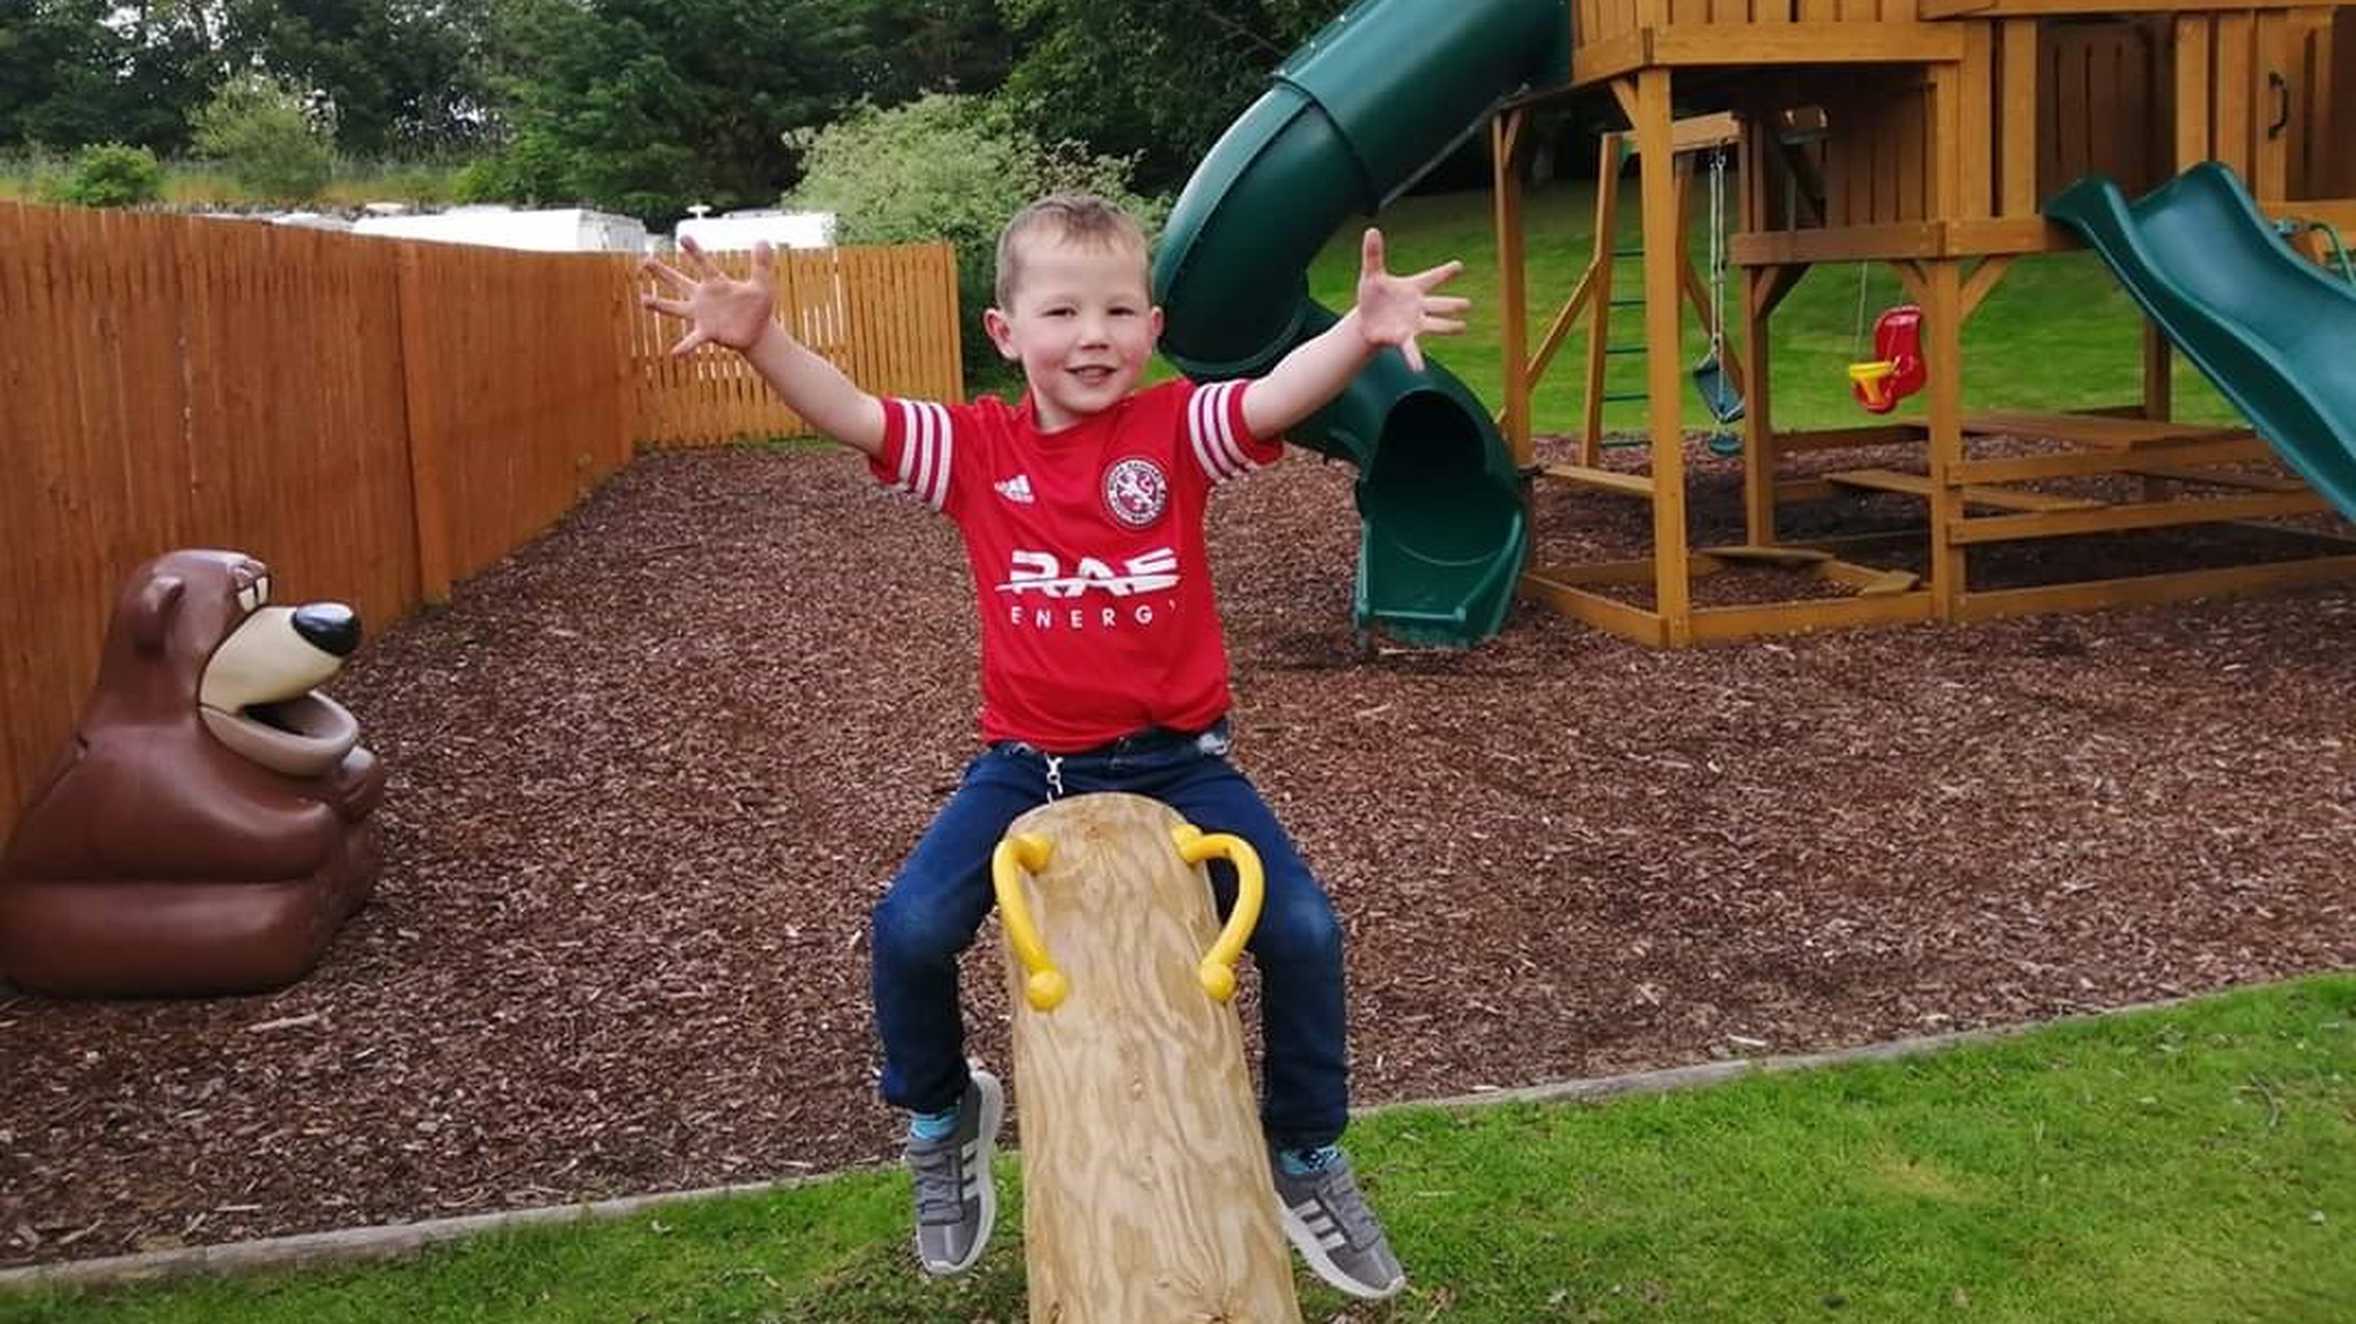 Scott, wearing a red football shirt and jeans, waving and smiling while sitting on a see-saw in a playground.